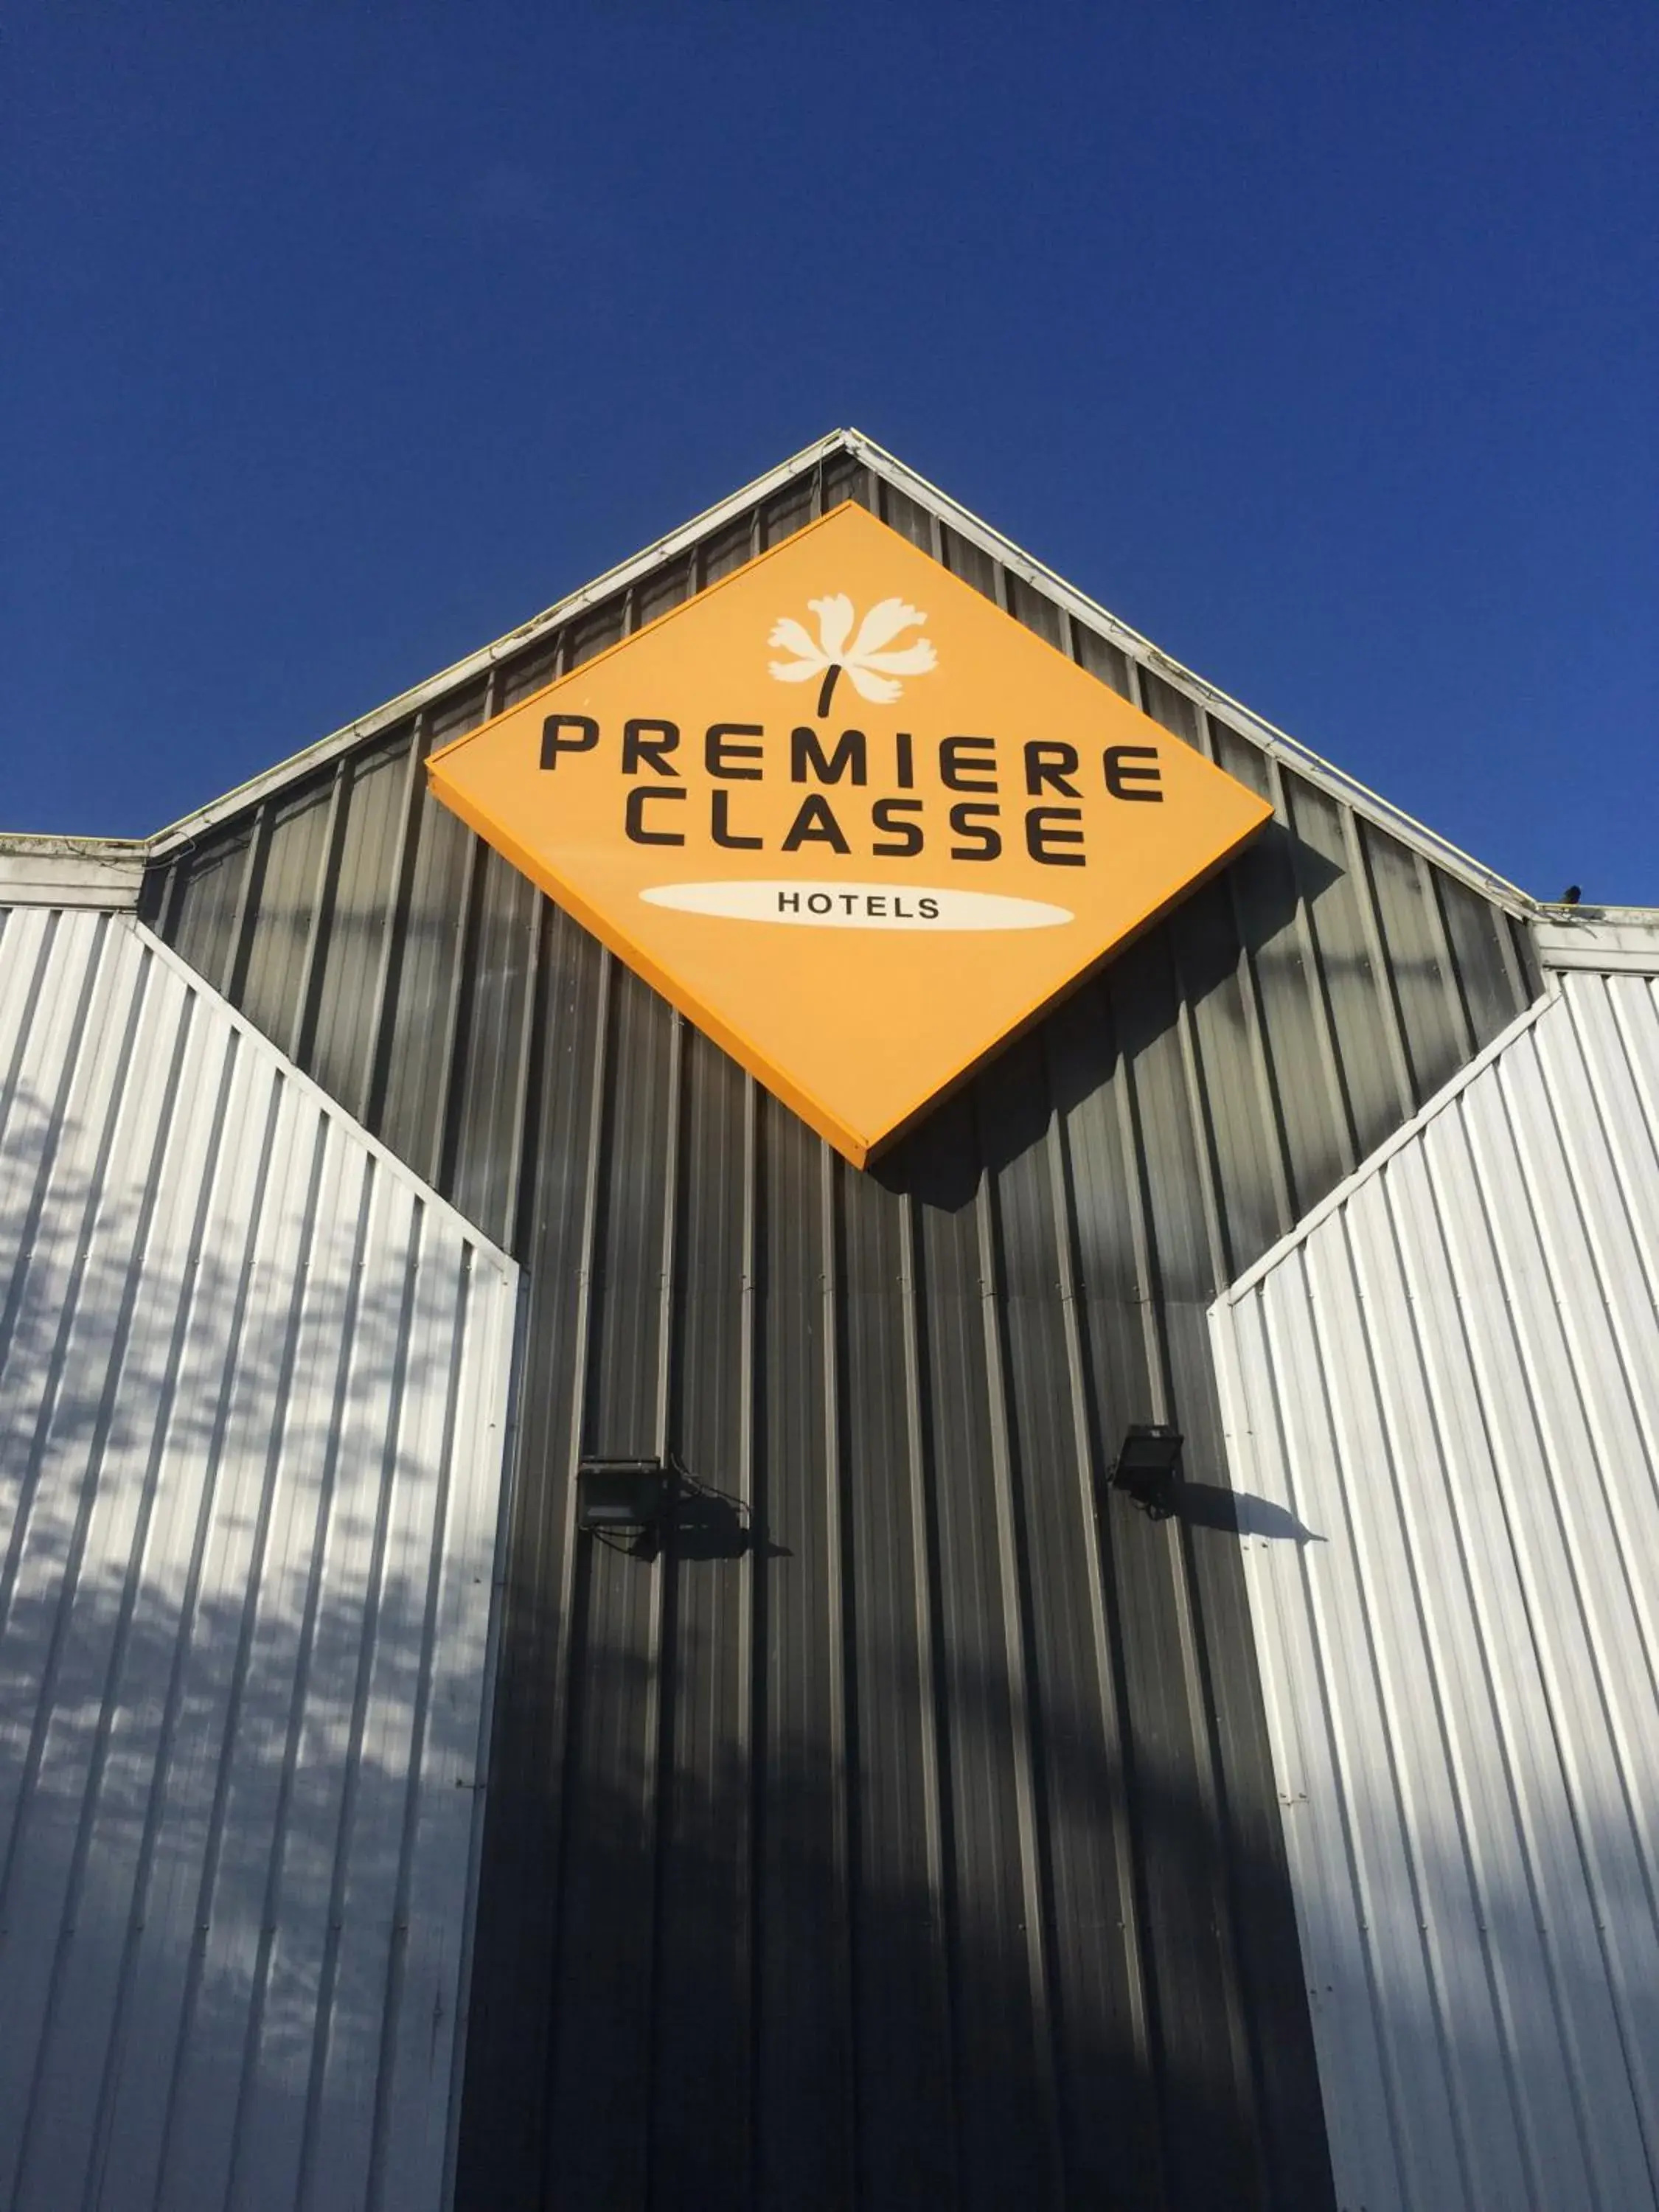 Property logo or sign in Premiere Classe Evreux